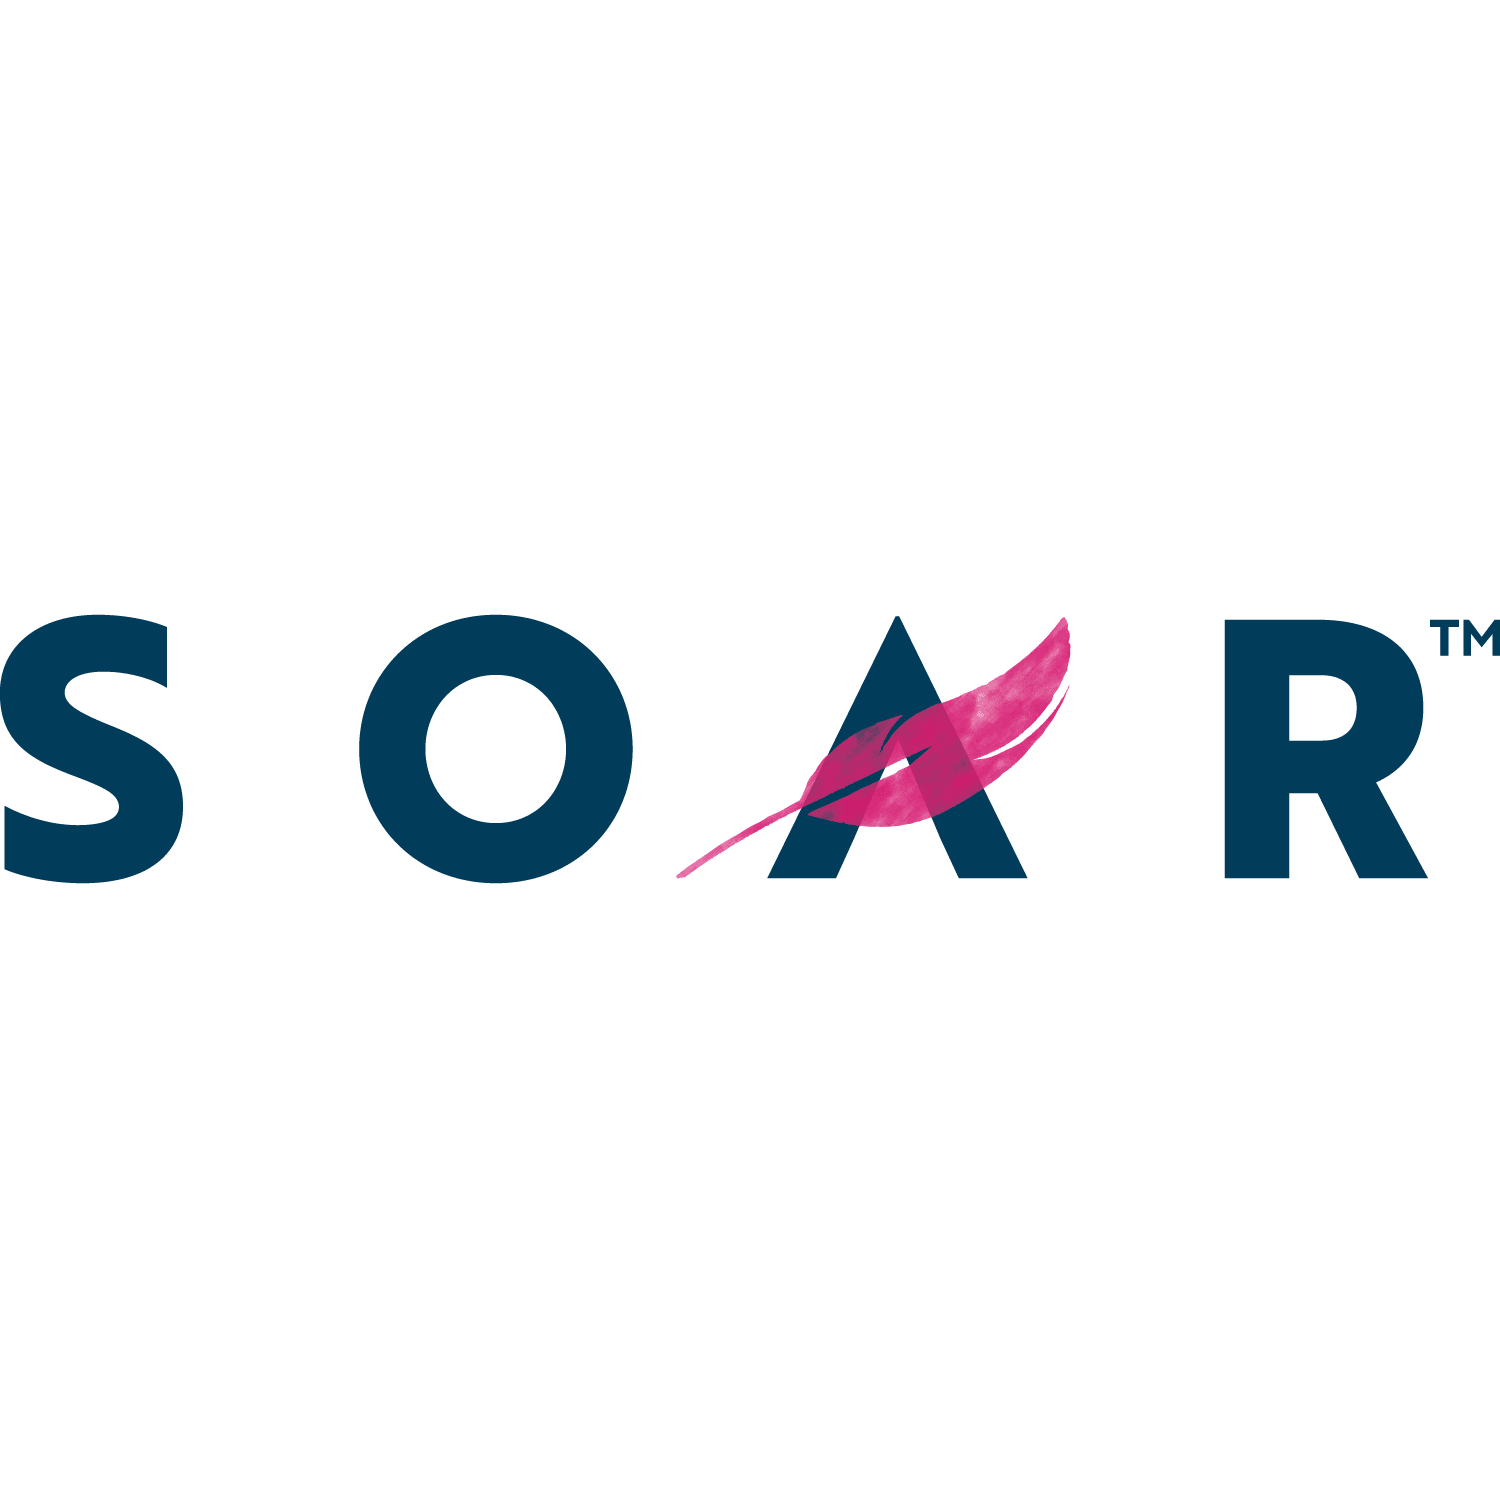 SOAR promos and coupon codes